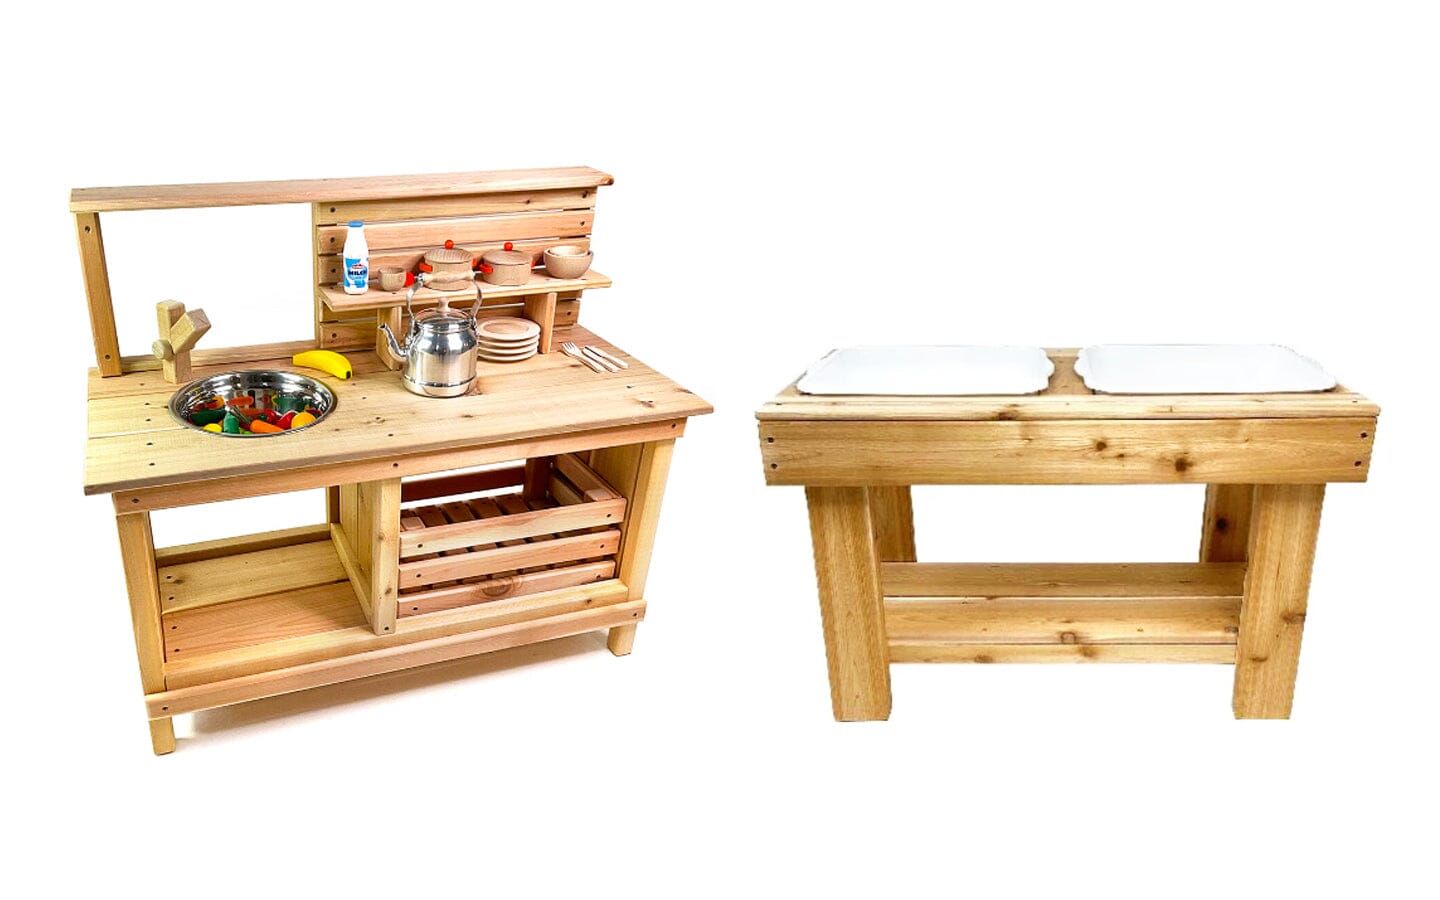 Mud Kitchen and Play Table Set - Toddler - louisekool